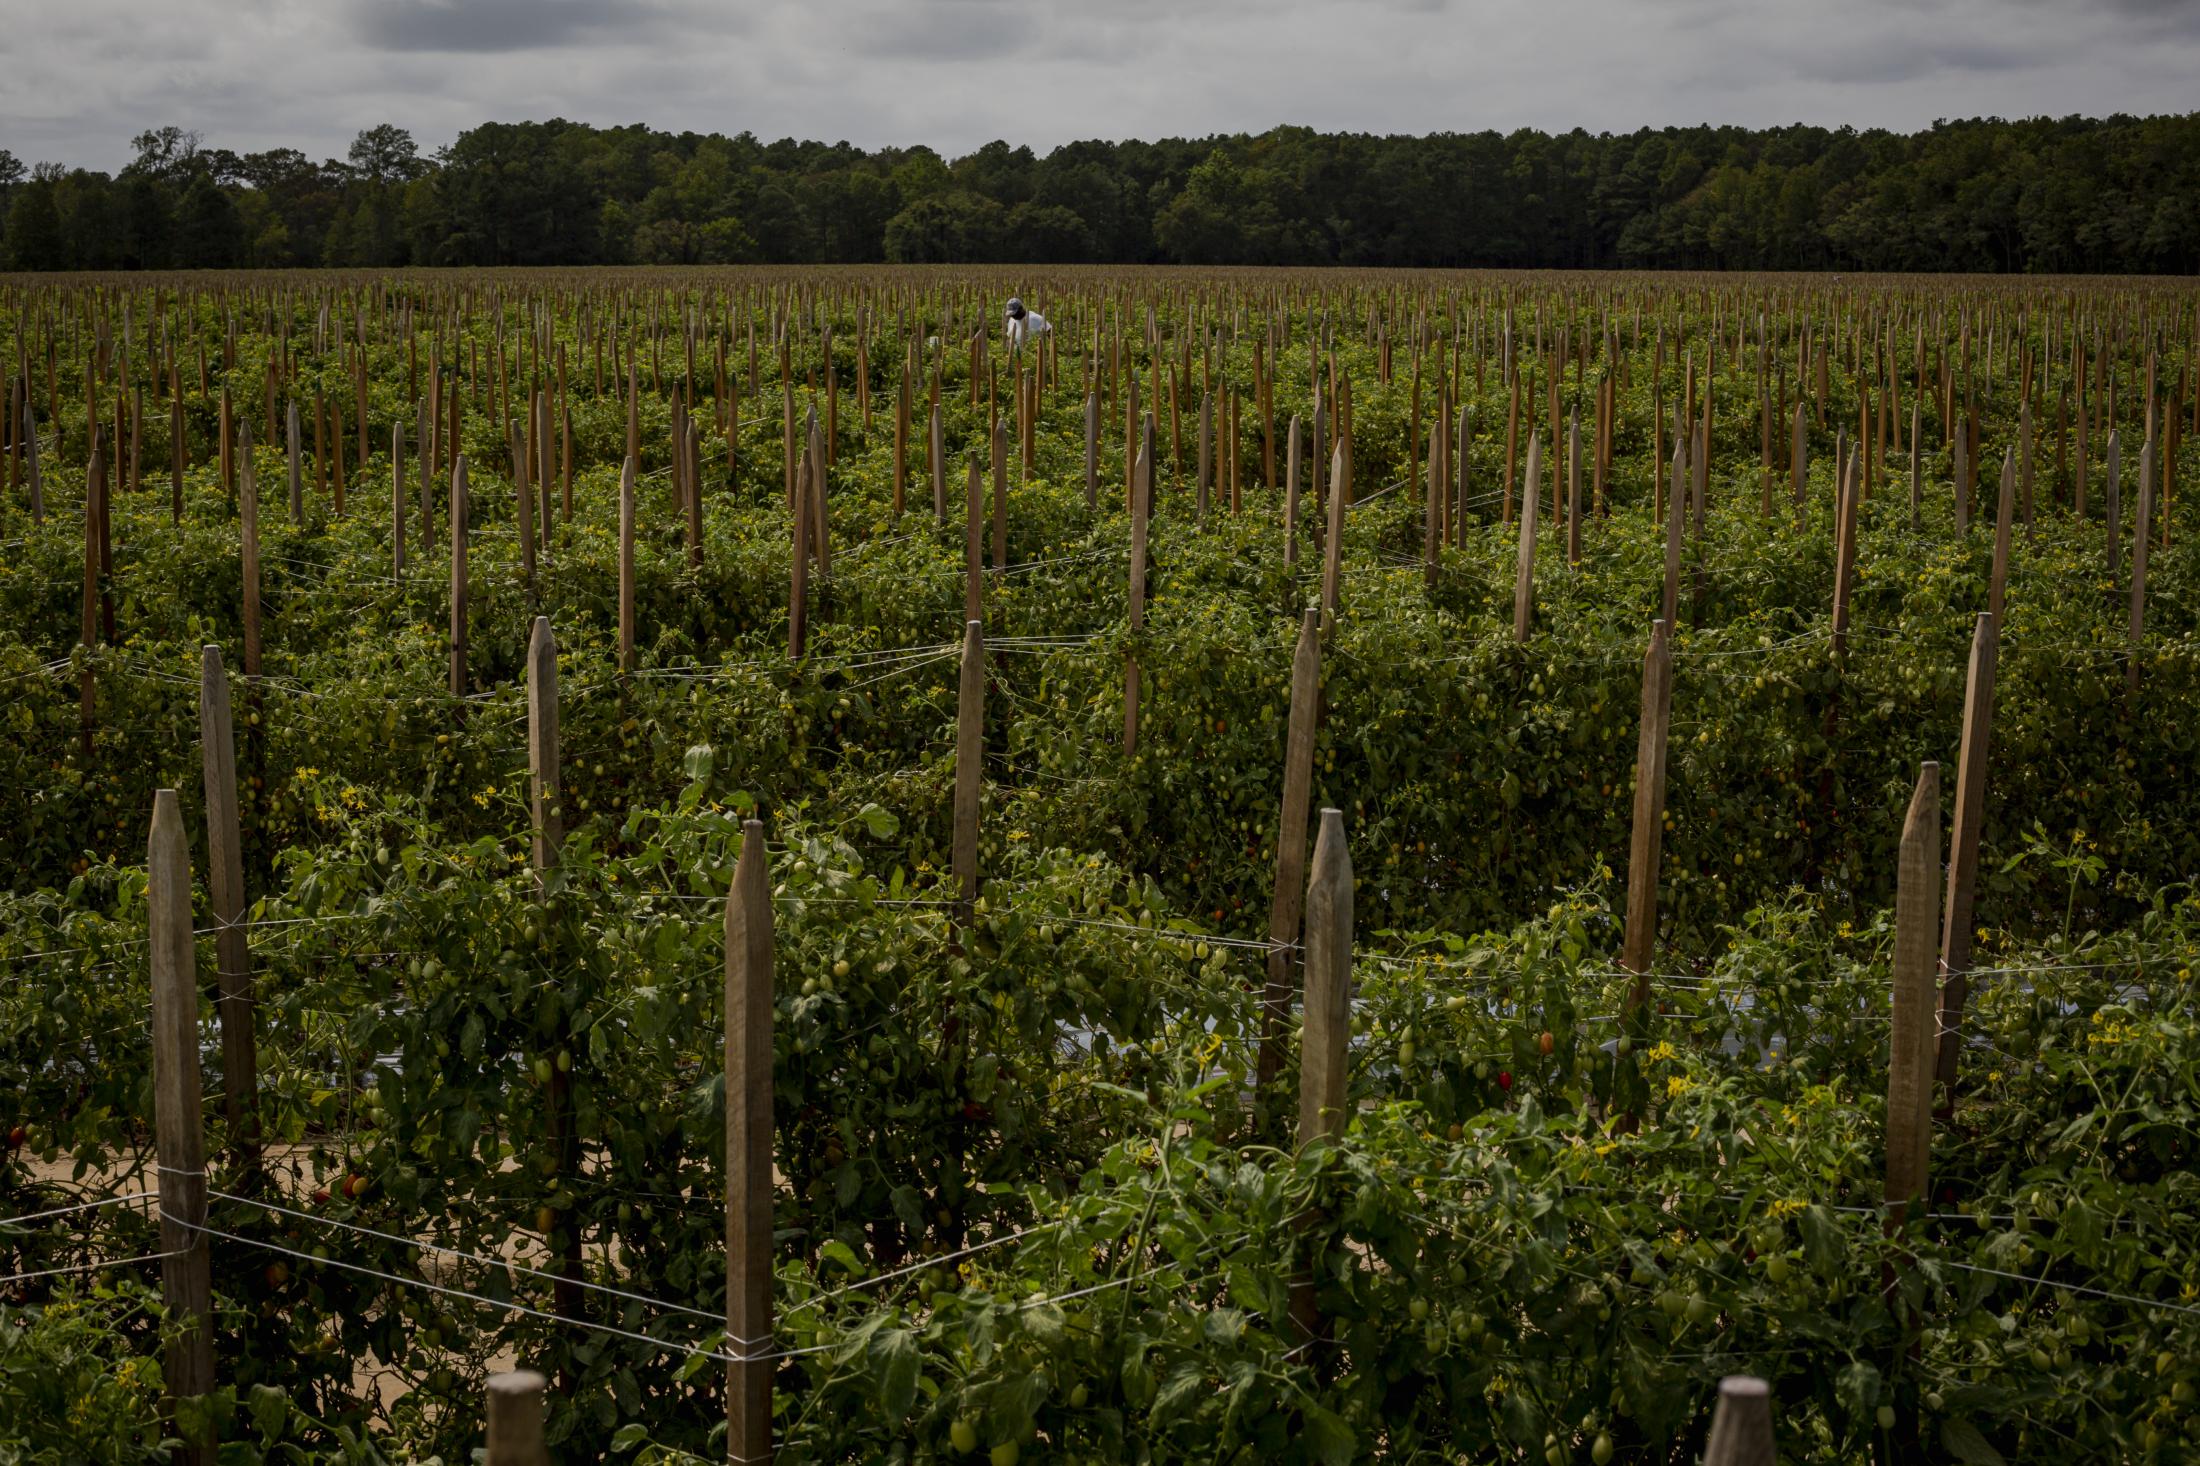 CHERITON, VA &ndash; September 9, 2020: Tomato fields in the remote Eastern Shore of Virginia. Seasonal farmworkers are brought by the thousands to toil in the tomato fields, since the start of the covid-19 pandemic, their conditions have worsened. Photo: Carlos Bernate for The New York Times